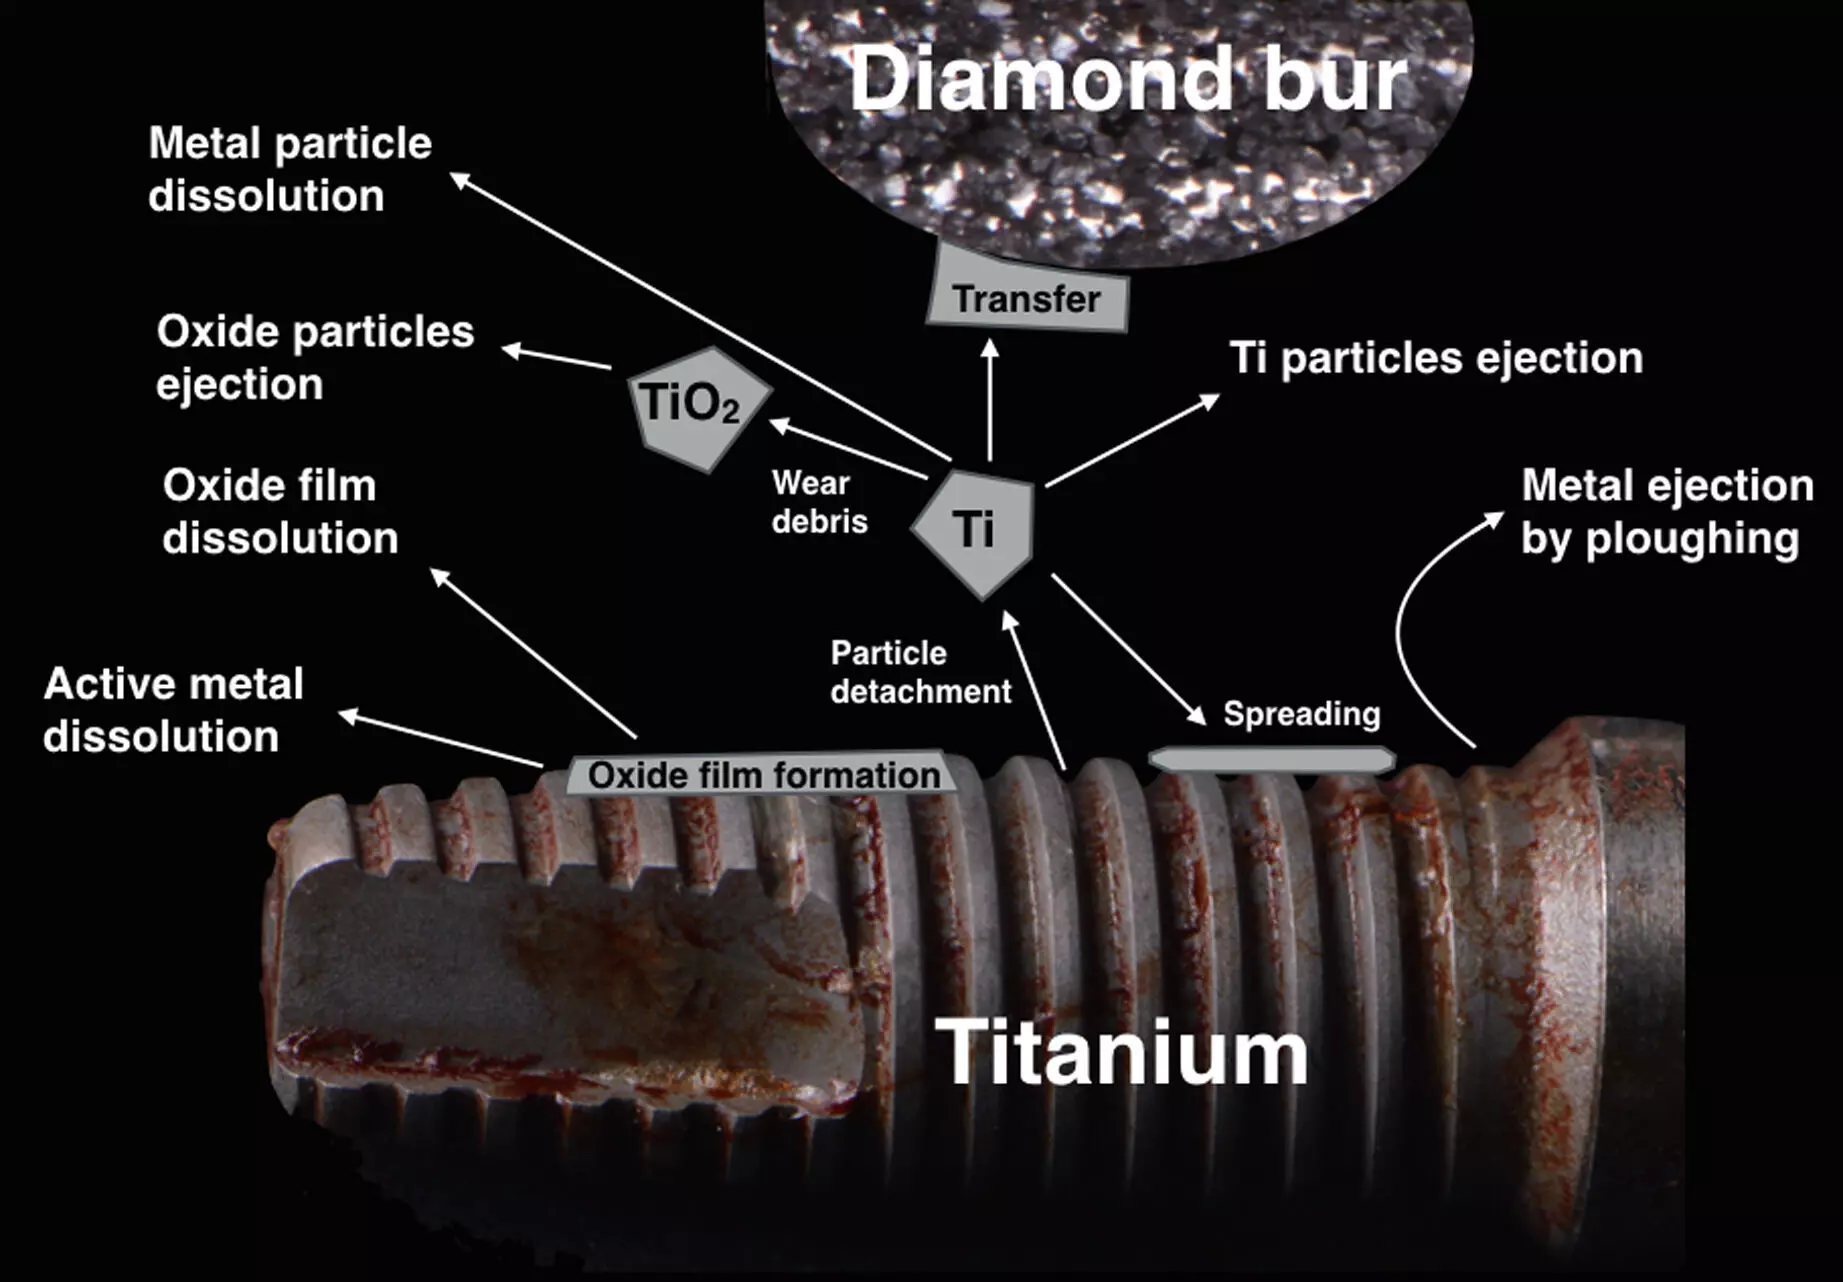 Commercially pure titanium debris  may induce carcinogenic effects on peri-implant tissues: Study